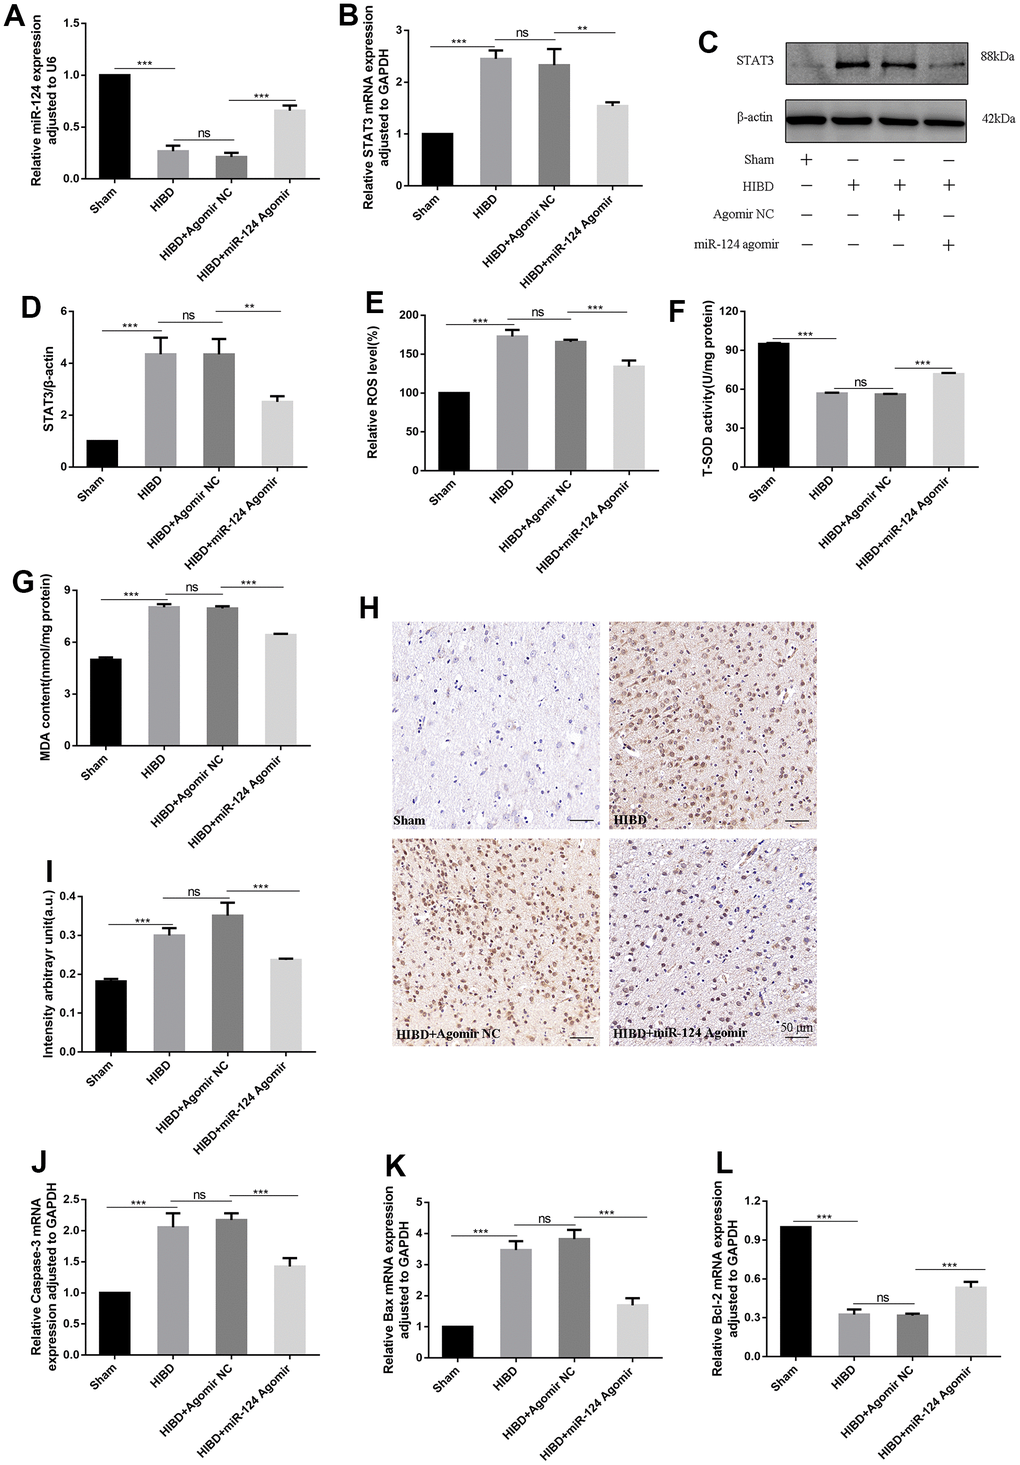 MiR-124 relieves oxidative stress and apoptosis in HIBD rats by inhibiting STAT3 in vivo. (A) The miR-124 was detected by qRT-PCR; (B) The STAT3 mRNA was detected by qRT-PCR; (C) The protein levels of STAT3 was detected by Western blot; (D) Quantitative analysis of the protein levels of STAT3; (E) The levels of intracellular ROS was measured; (F) The SOD activity was determined by the commercial kits; (G) The content of MDA was determined by the commercial kits; (H) Immunohistochemistry analysis of 8-OHdG intensity arbitrary in the peri-infarction cortex(number of animals: n=5/group). Scale bar, 50μm; (I) Quantitative analysis of protein levels of 8-OHdG by immunohistochemistry assay; (J–L) The mRNA levels of Caspase-3, Bax, and Bcl-2 were detected by qRT-PCR. Data were expressed as mean ± SD (number of animals: n =5/group); NS, not significant for p > 0.05, * p p p 